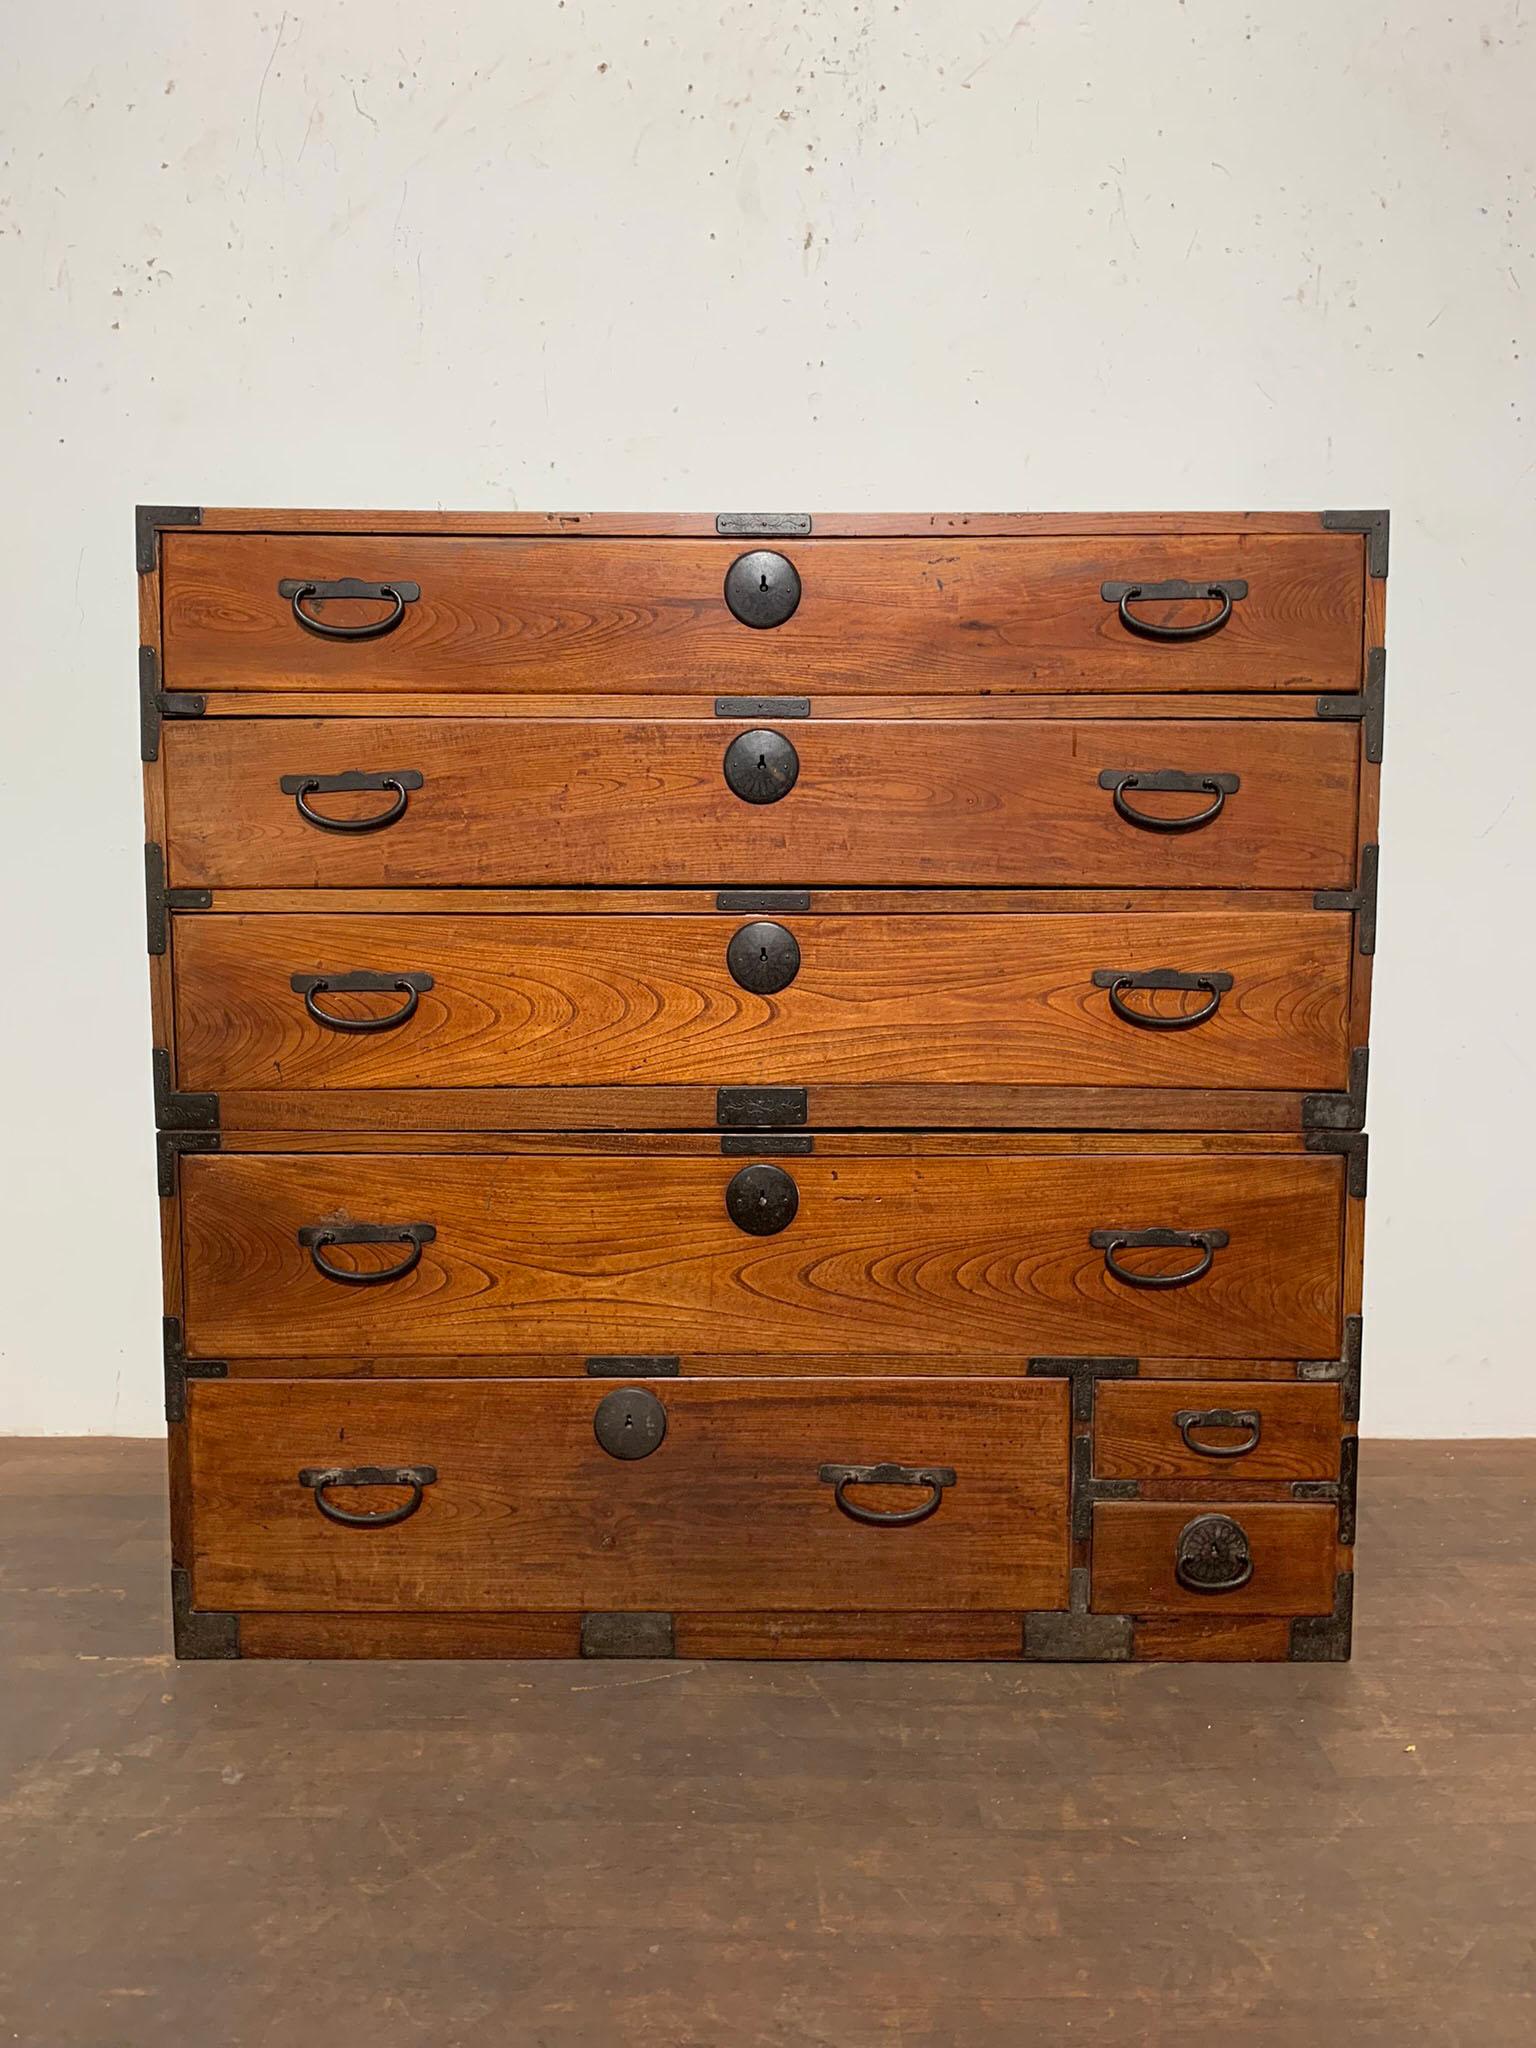 A late 19th century Japanese two-piece tansu chest in kiri wood with original hand forged iron hardware.